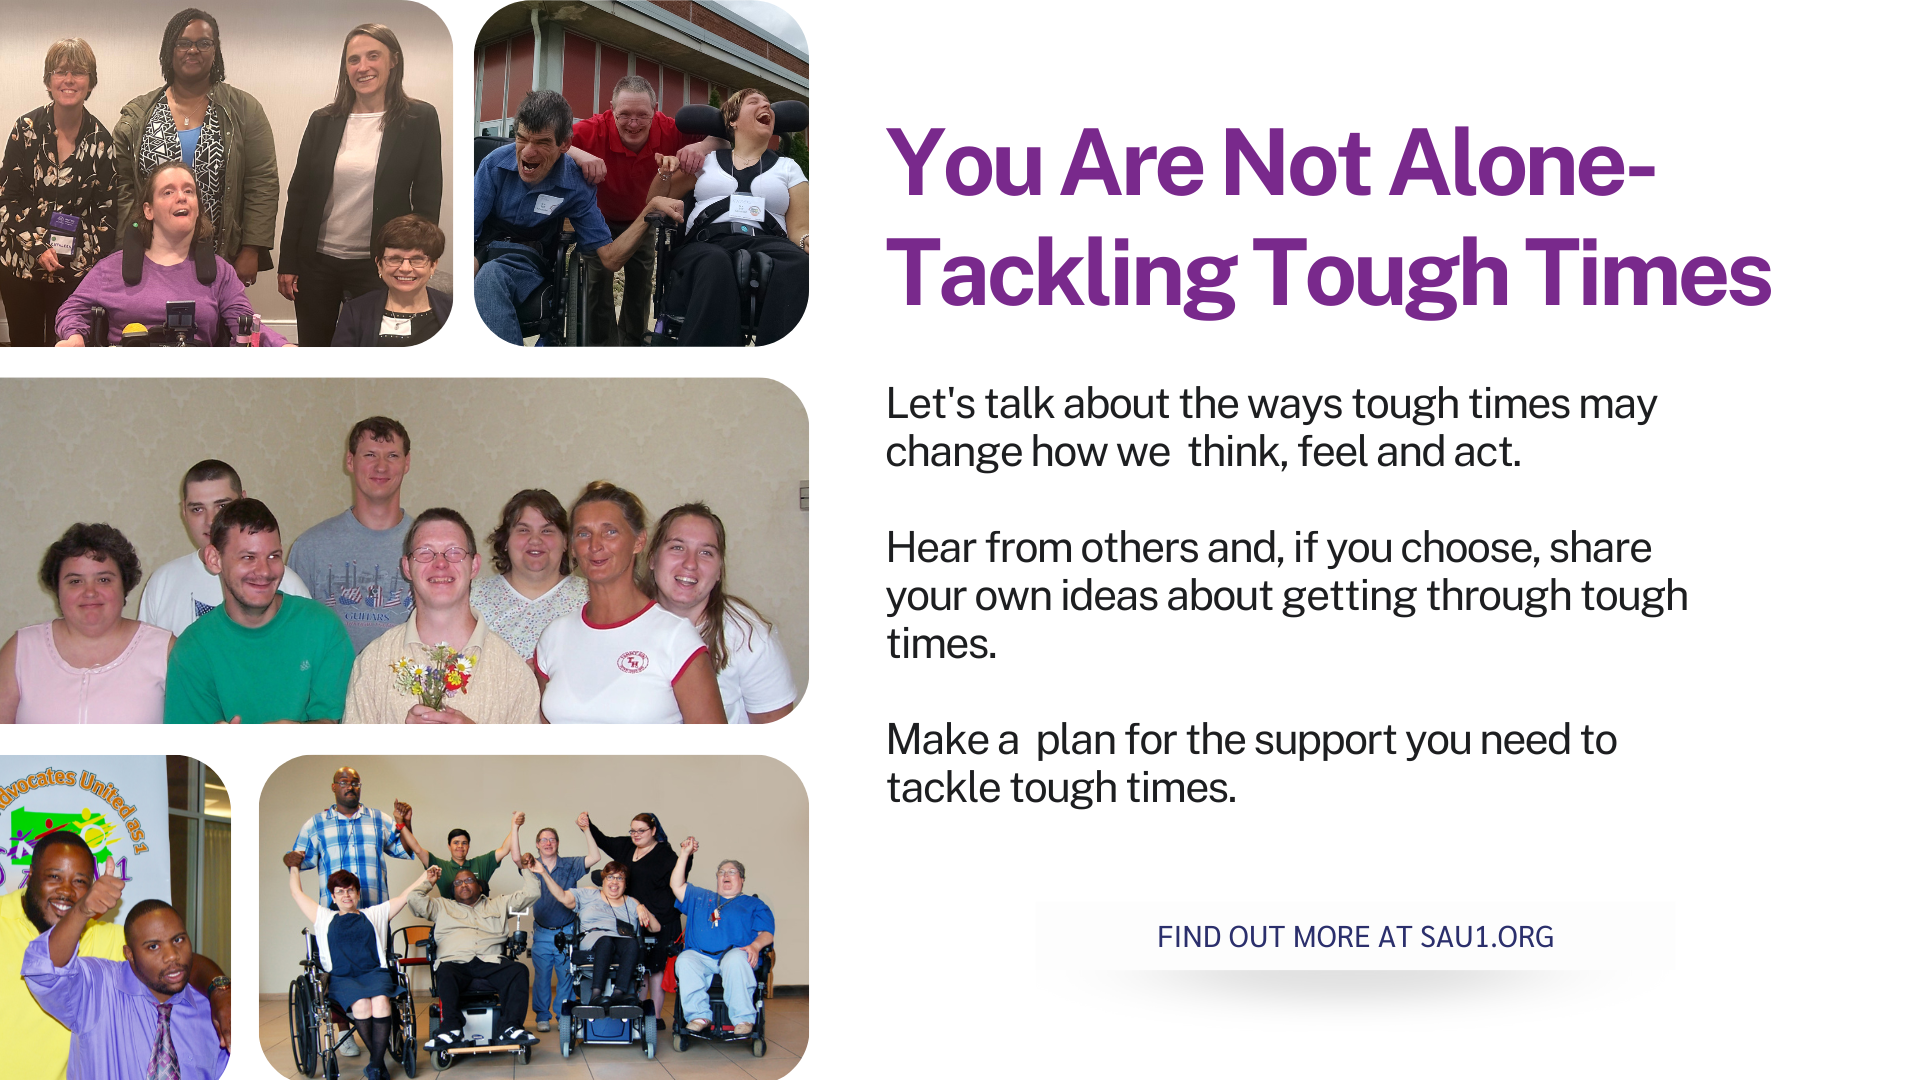 Banner. Text to the right of five photos of different groups of people says You Are Not Alone- Tackling Tough Times  Let's talk about the ways tough times may change how we think, feel and act.  Hear from others and, if you choose, share your own ideas about getting through tough times.  Make a plan for the support you need to tackle tough times.  FIND OUT MORE AT SAU1.ORG